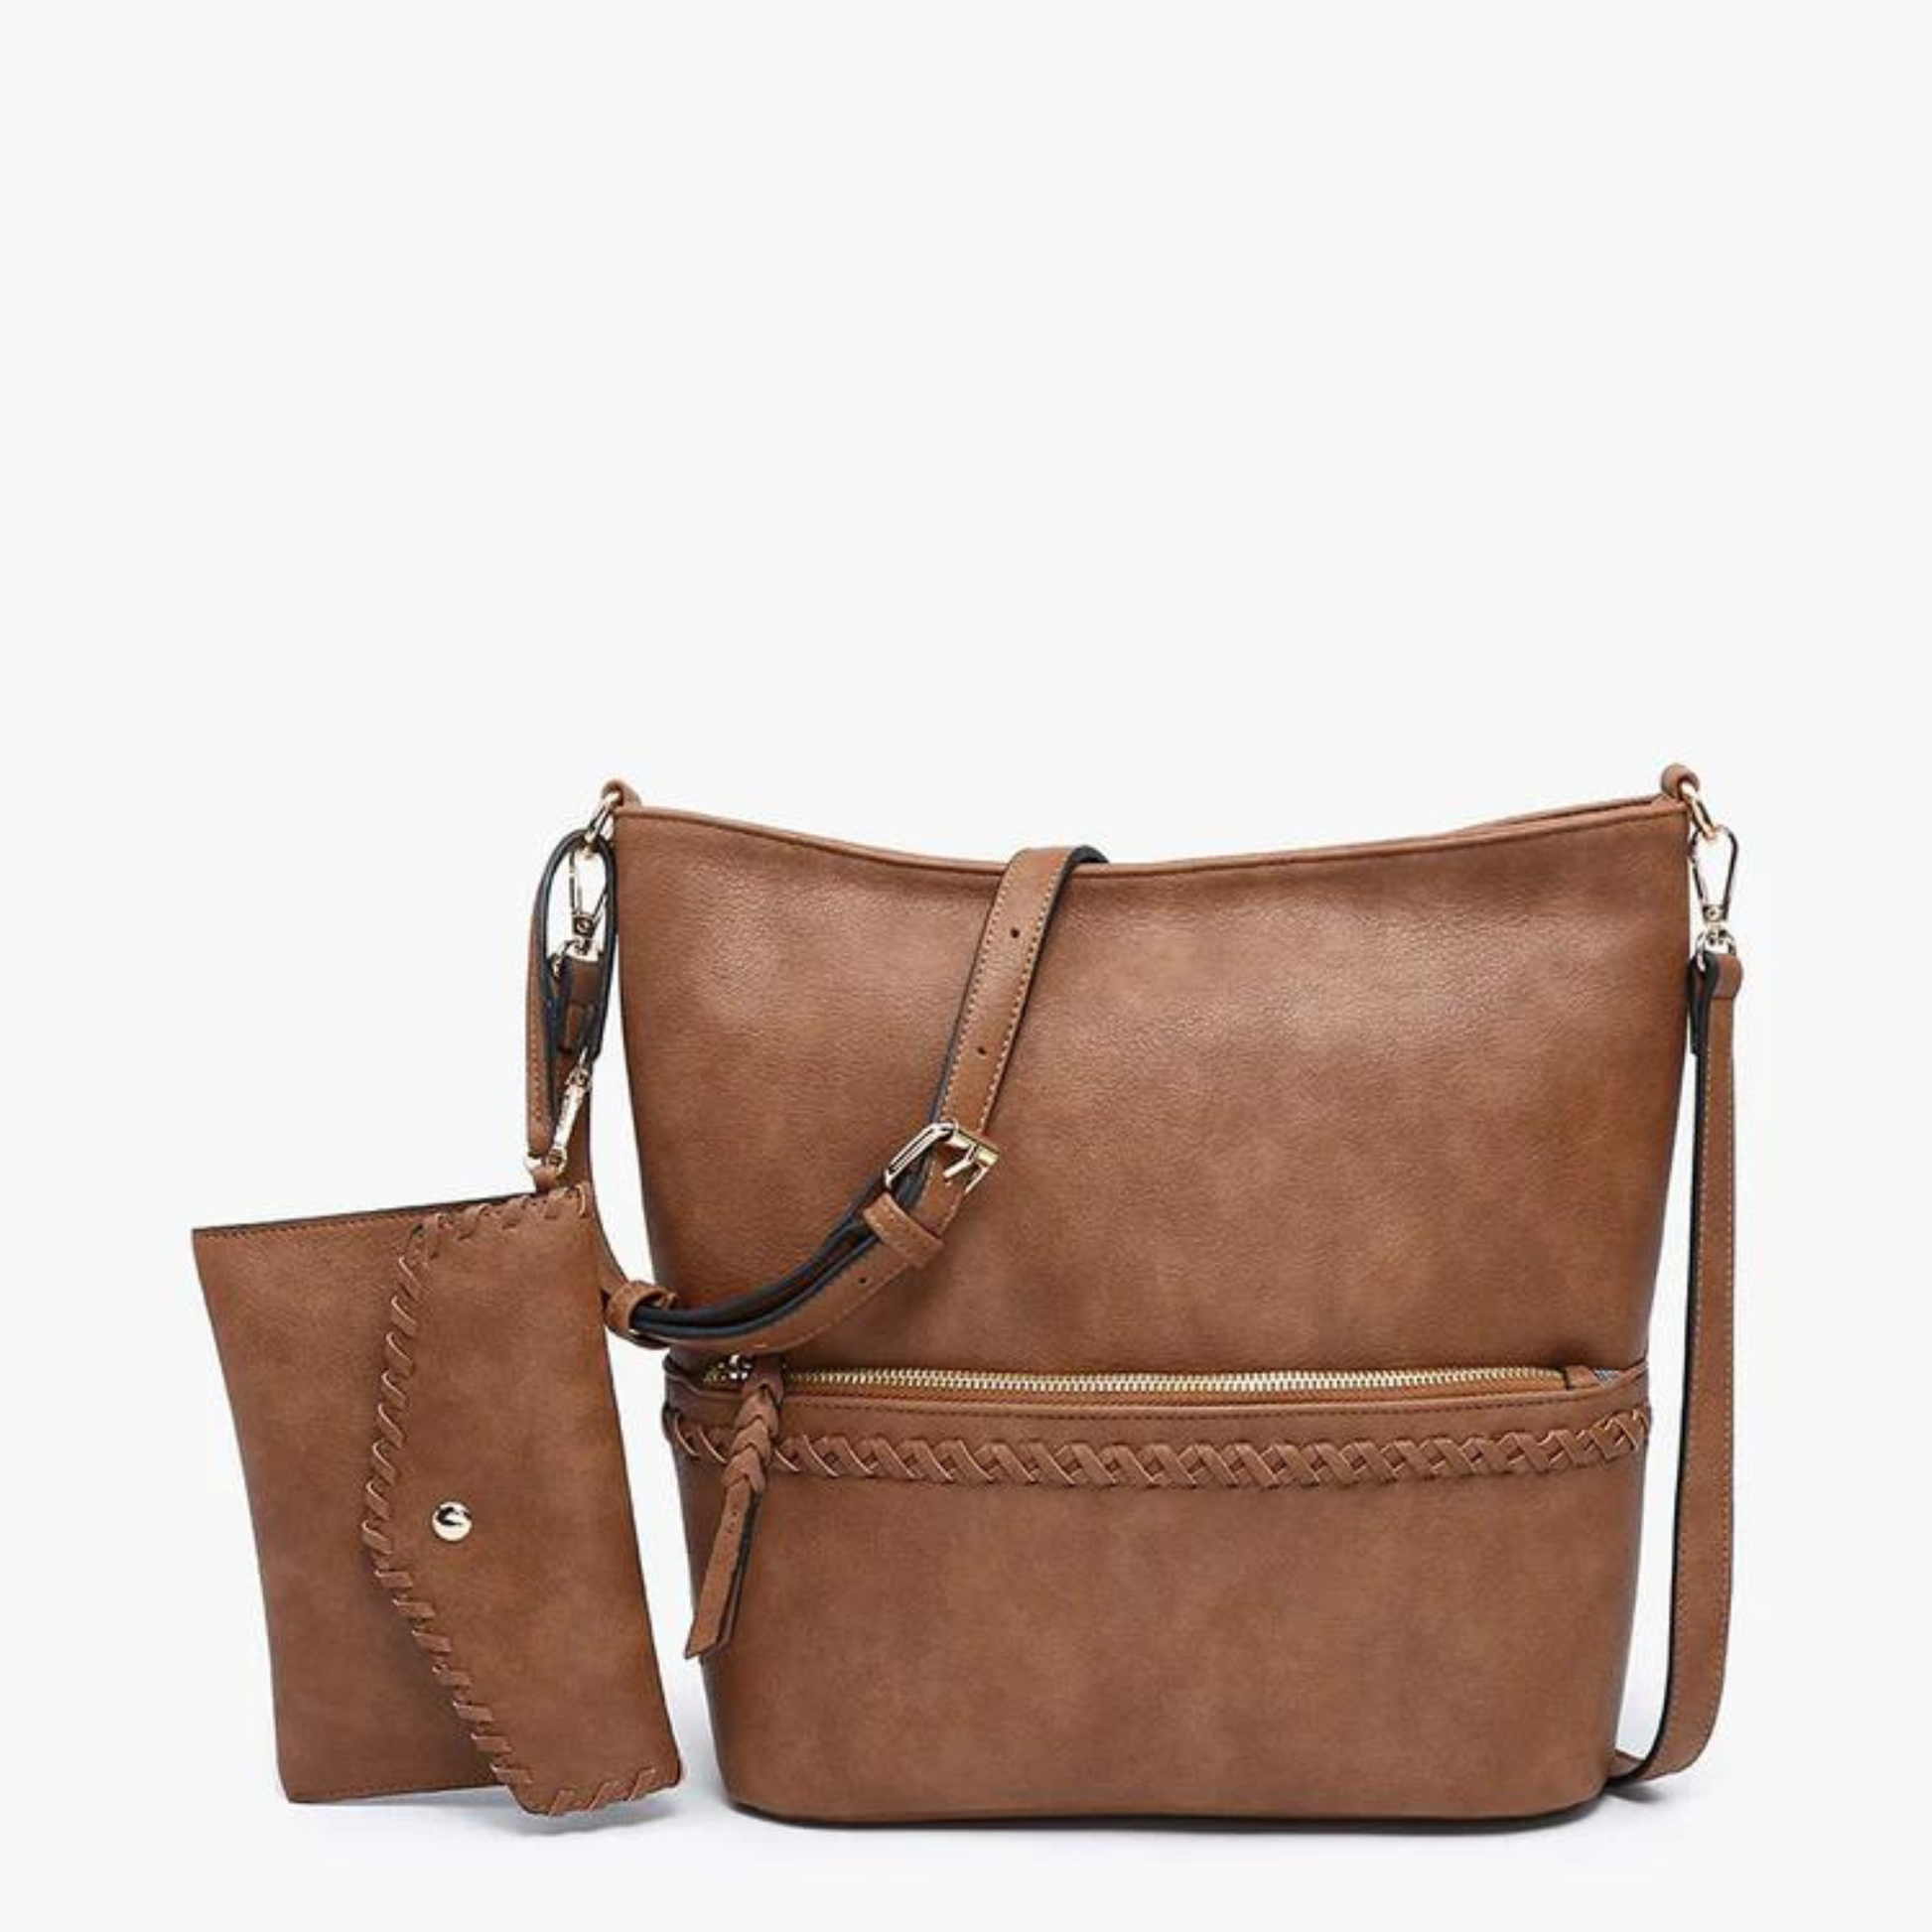 Cynthia distressed whipstitch hobo bag in brown